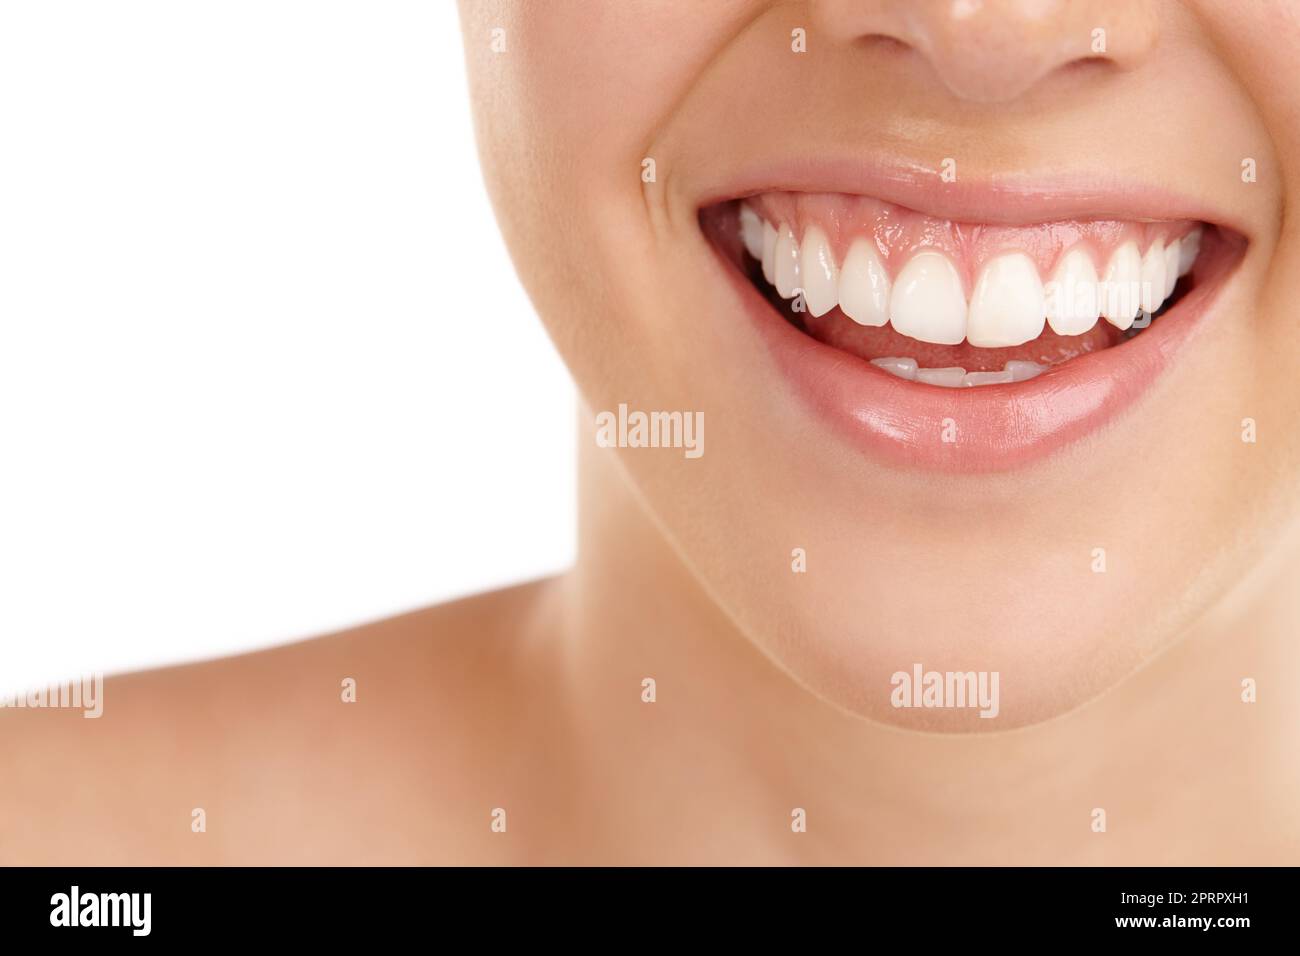 Perfectly white. Closeup shot of a young womans toothy smile against a white background. Stock Photo